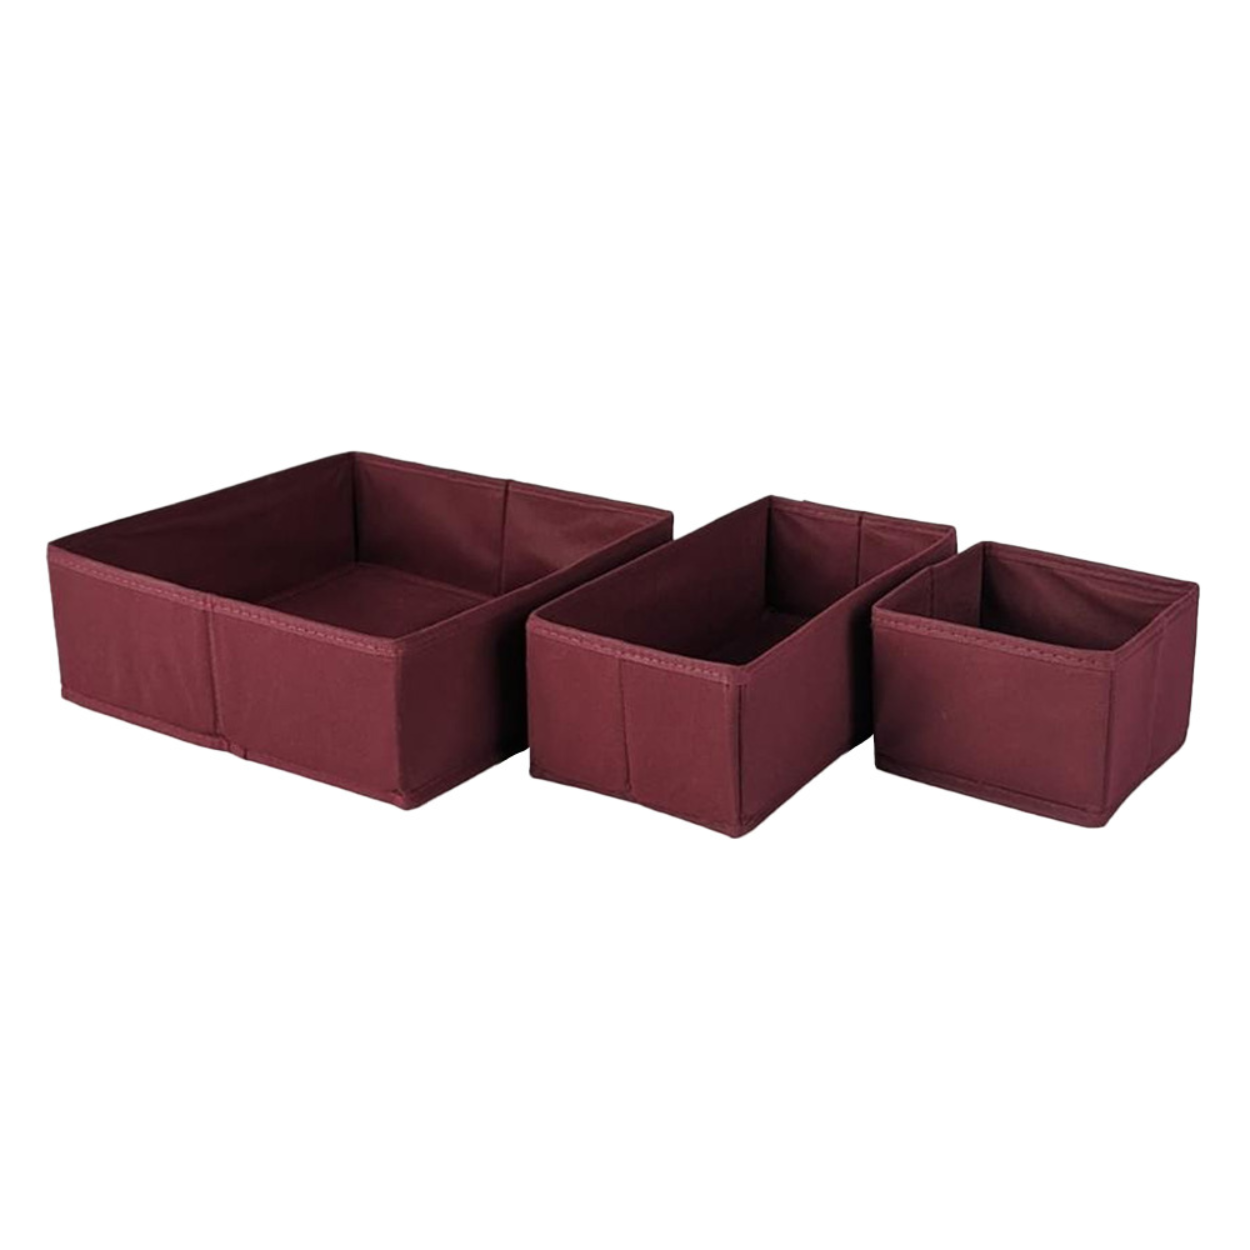 Qoolish Pack of 3 Drawer Organizers: Neatly Organize with Style (Available in 6 Colors)